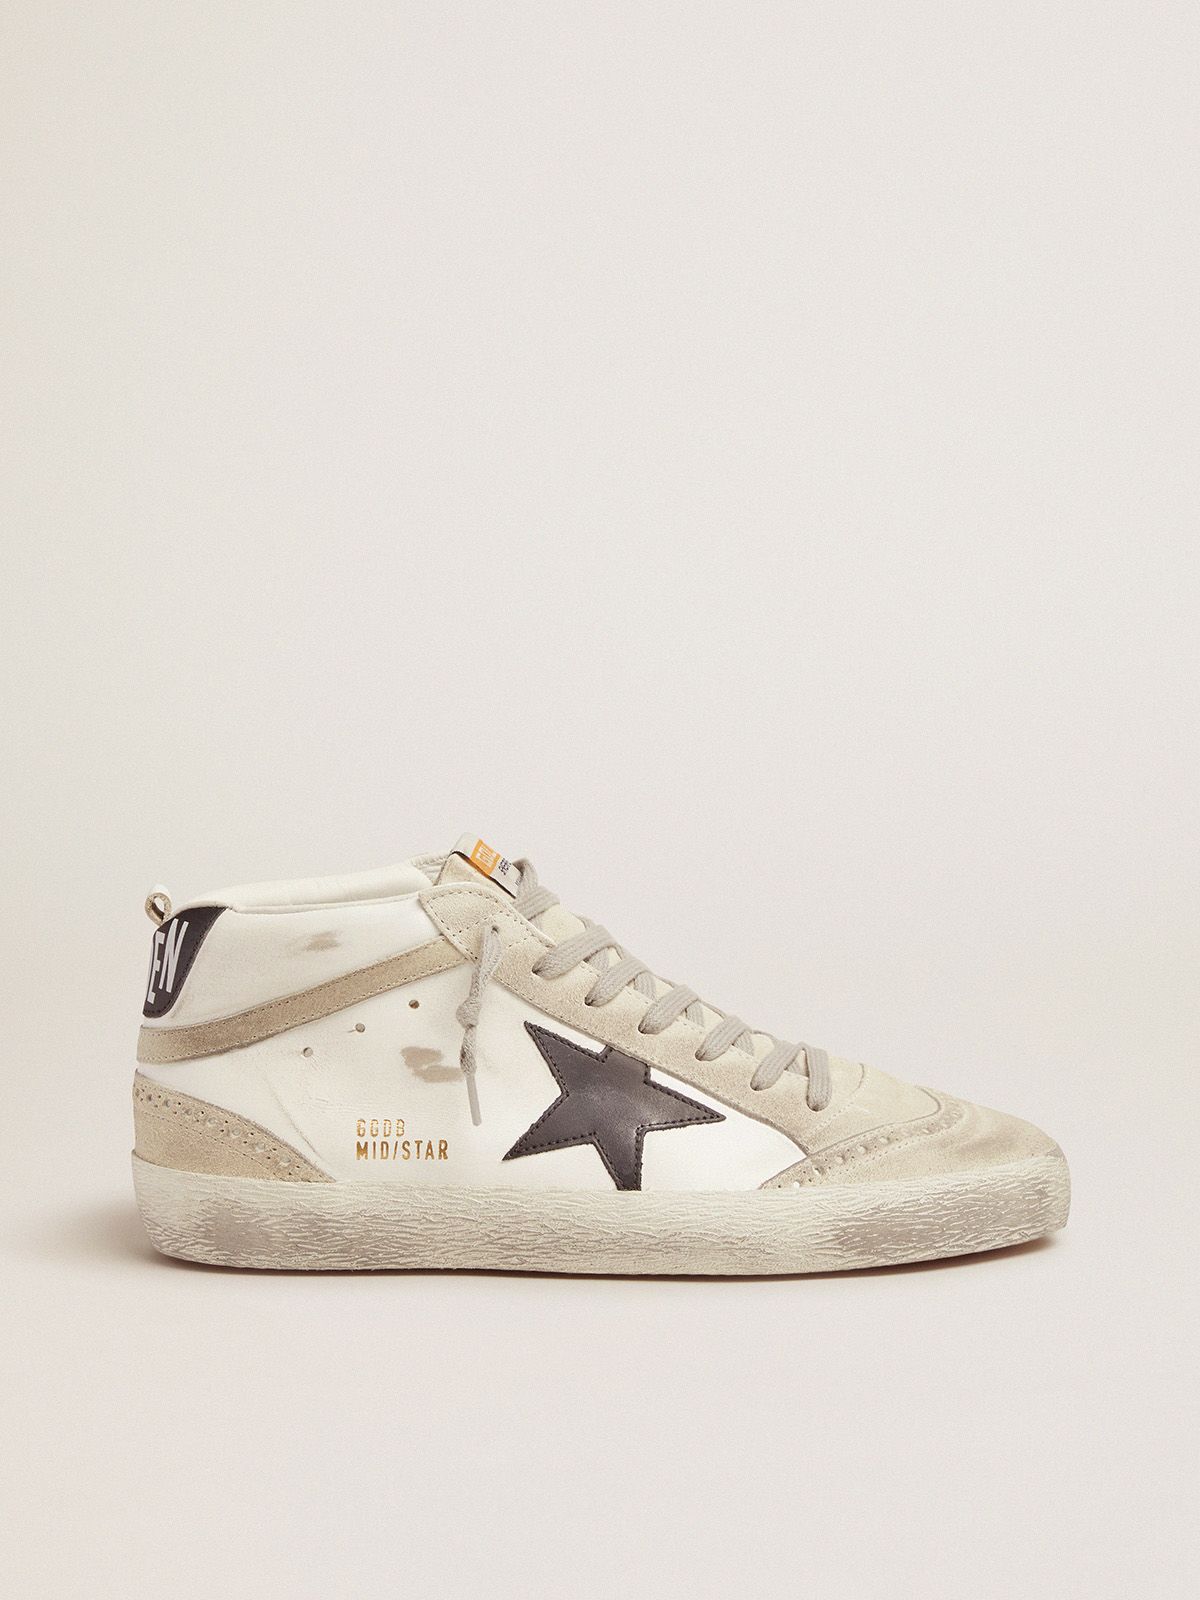 Black and white Mid Star sneakers - GOLDEN GOOSE